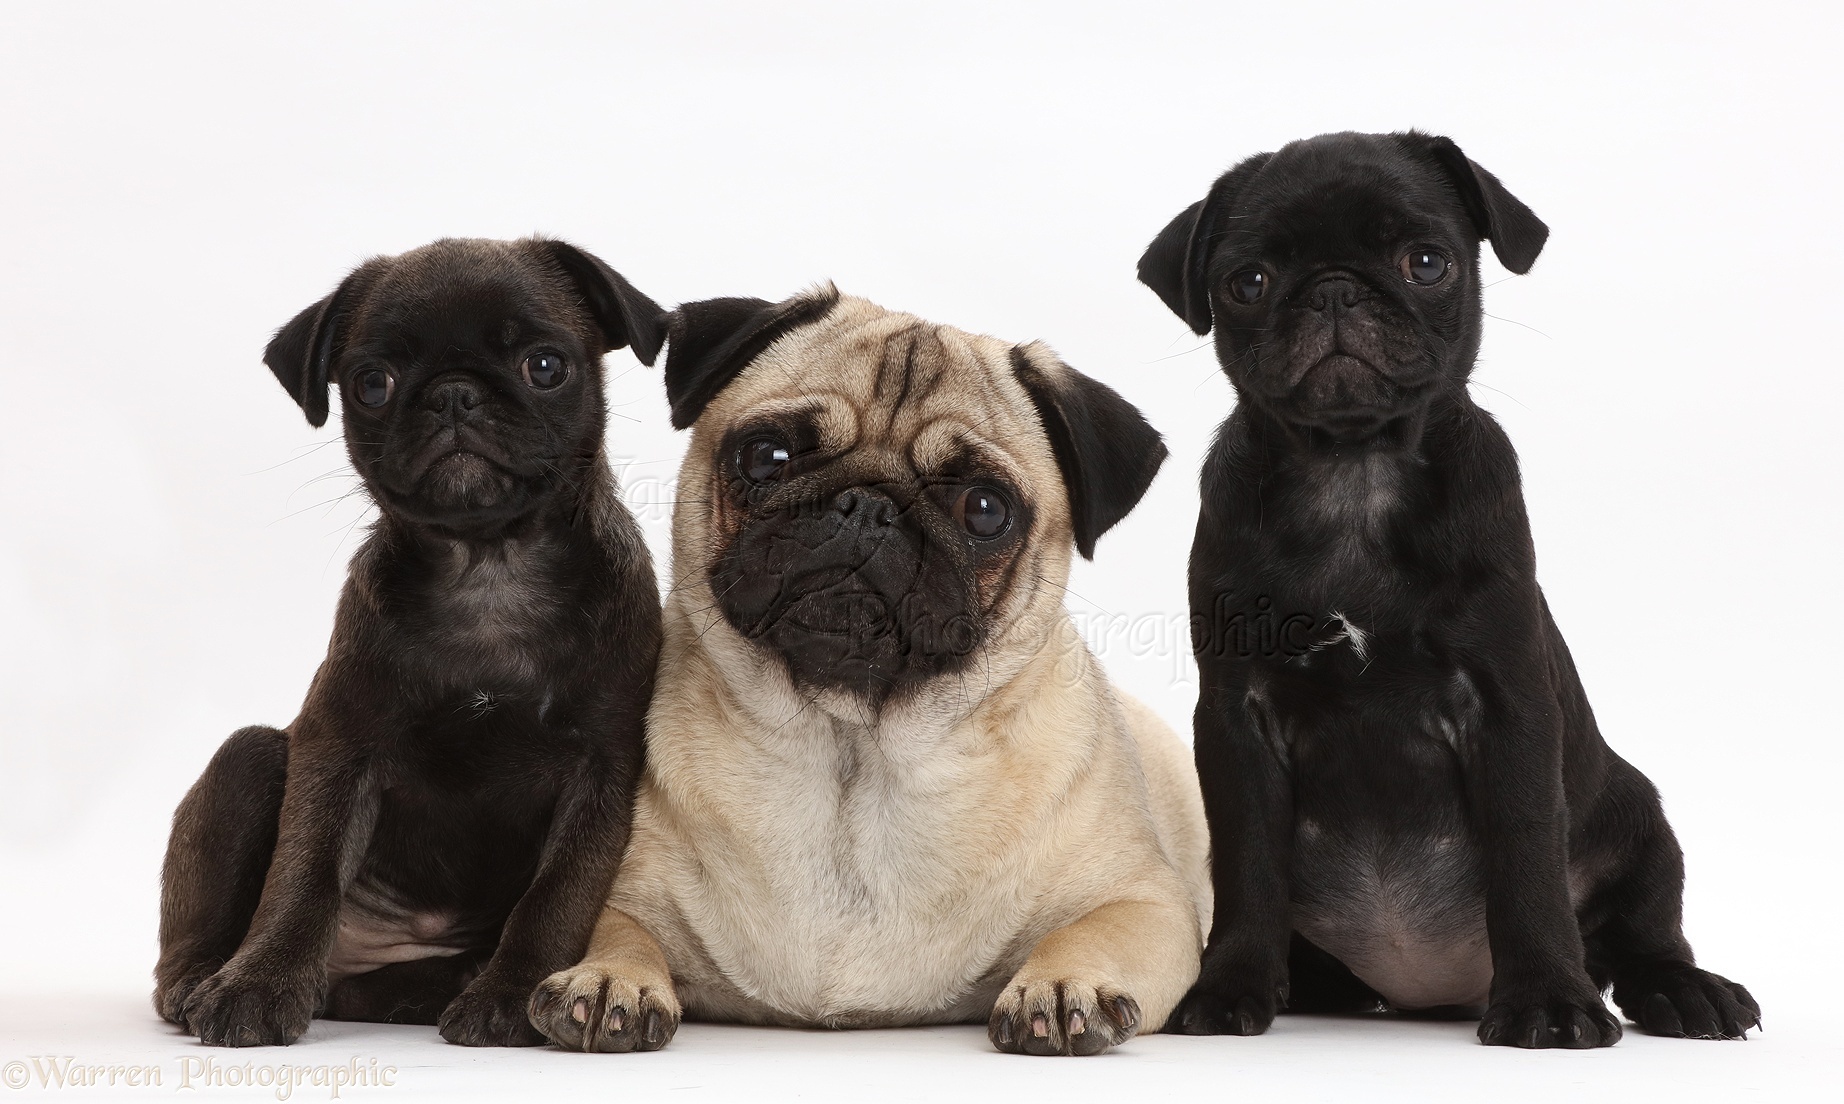 Dogs: Platinum and black Pug puppies with adult Pug photo.